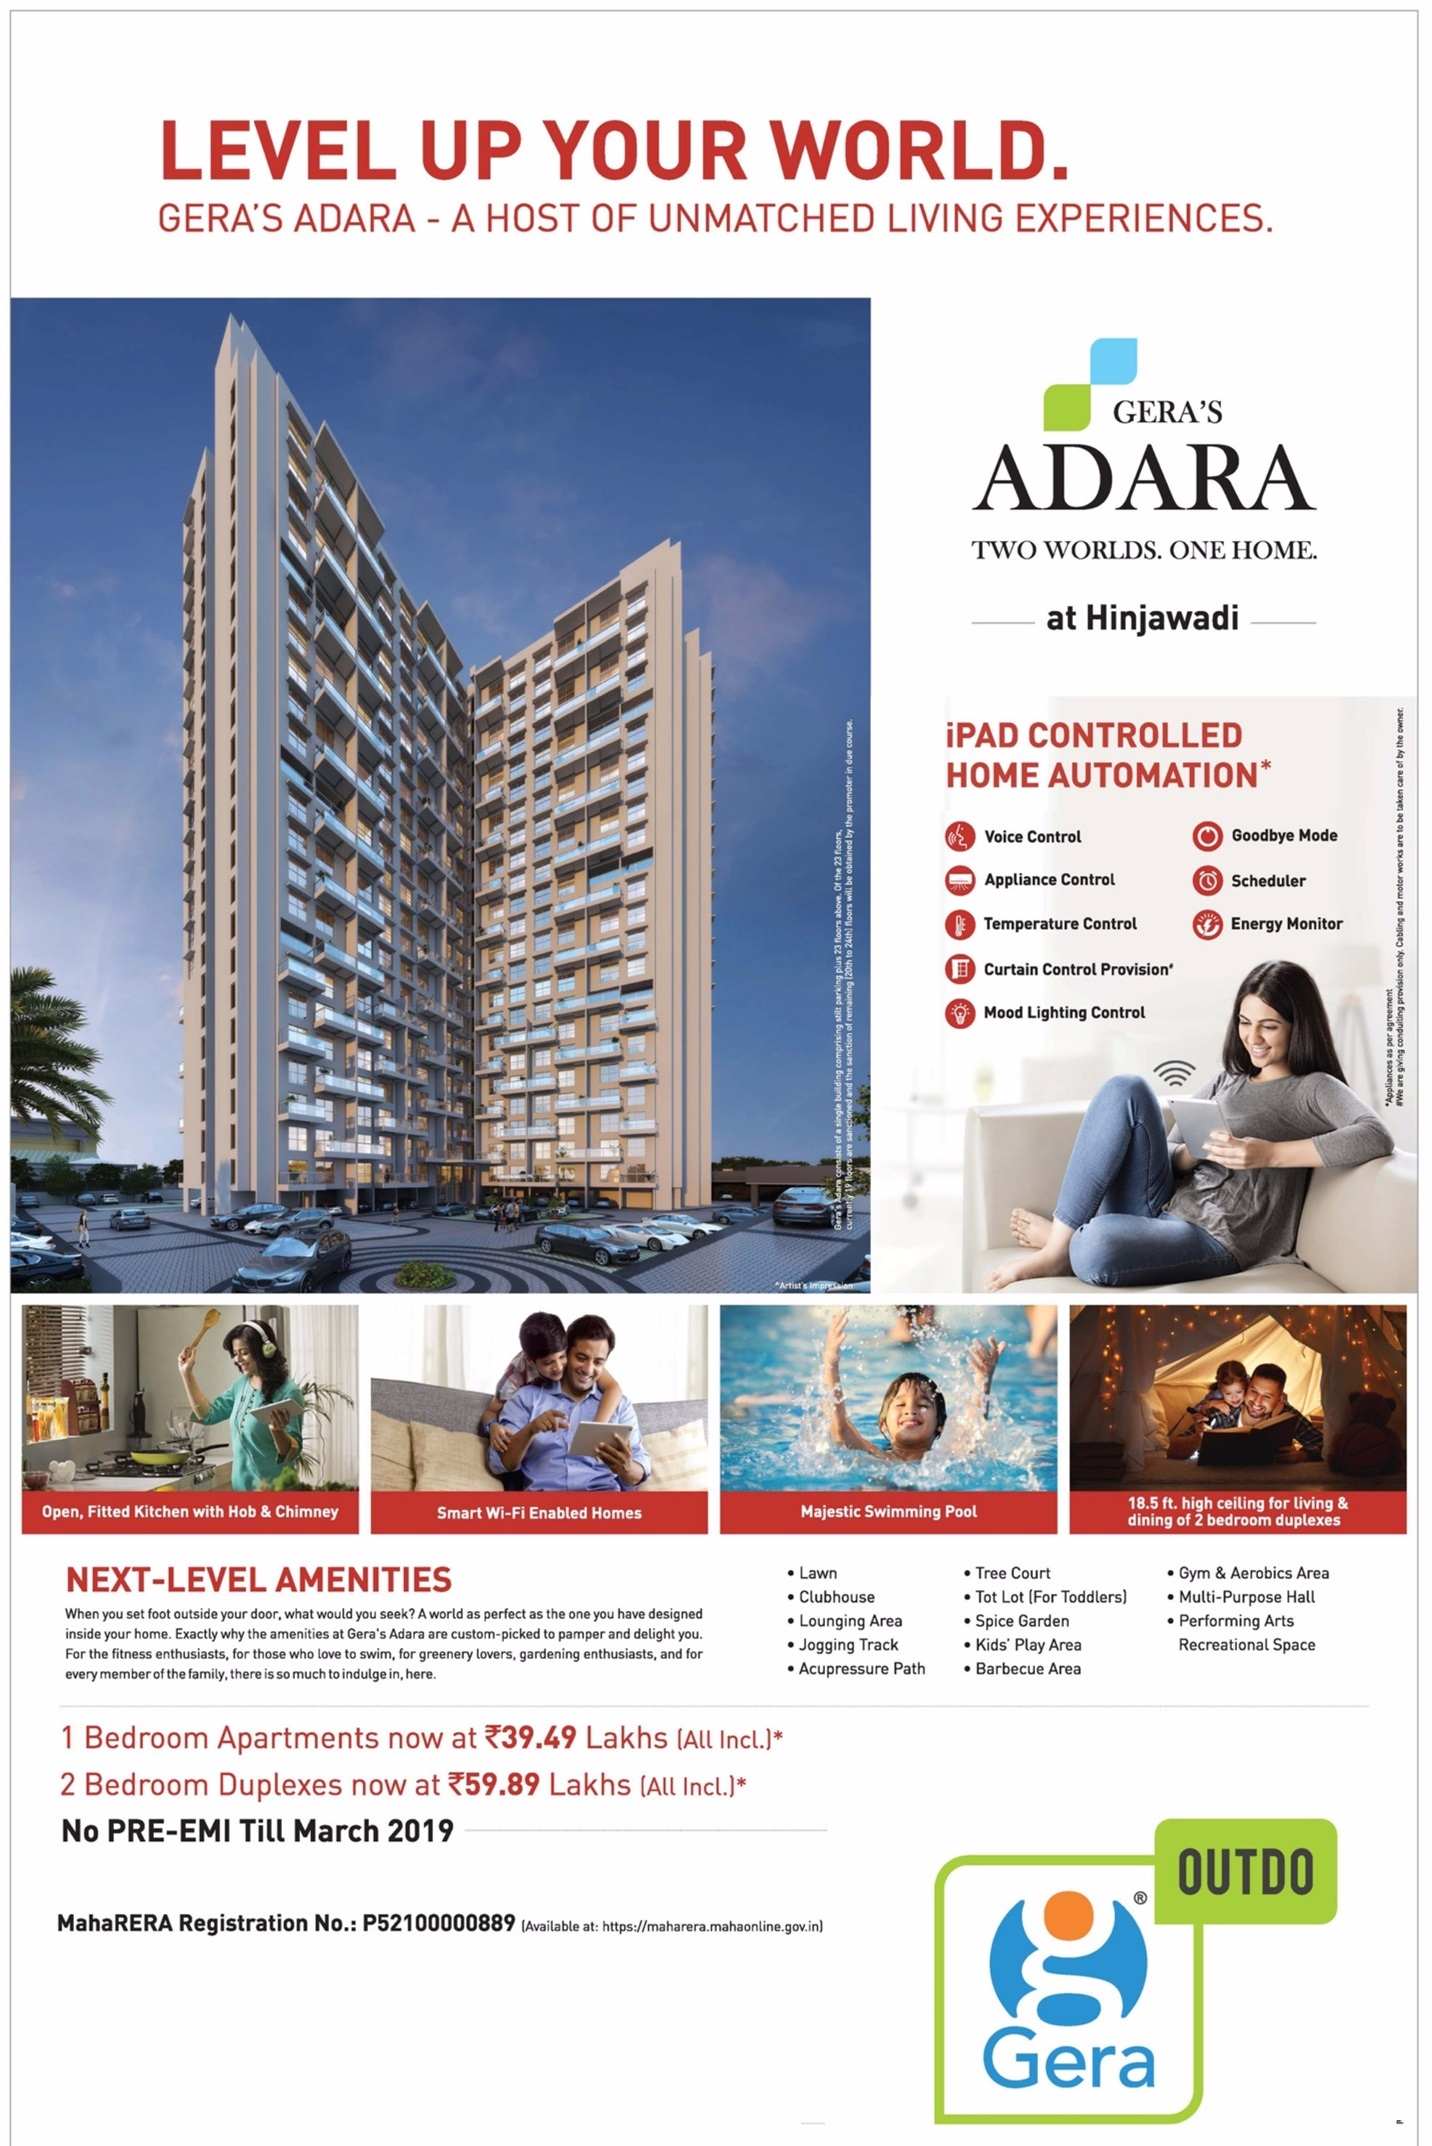 Gera Adara - A host of unmatched living experience in Pune